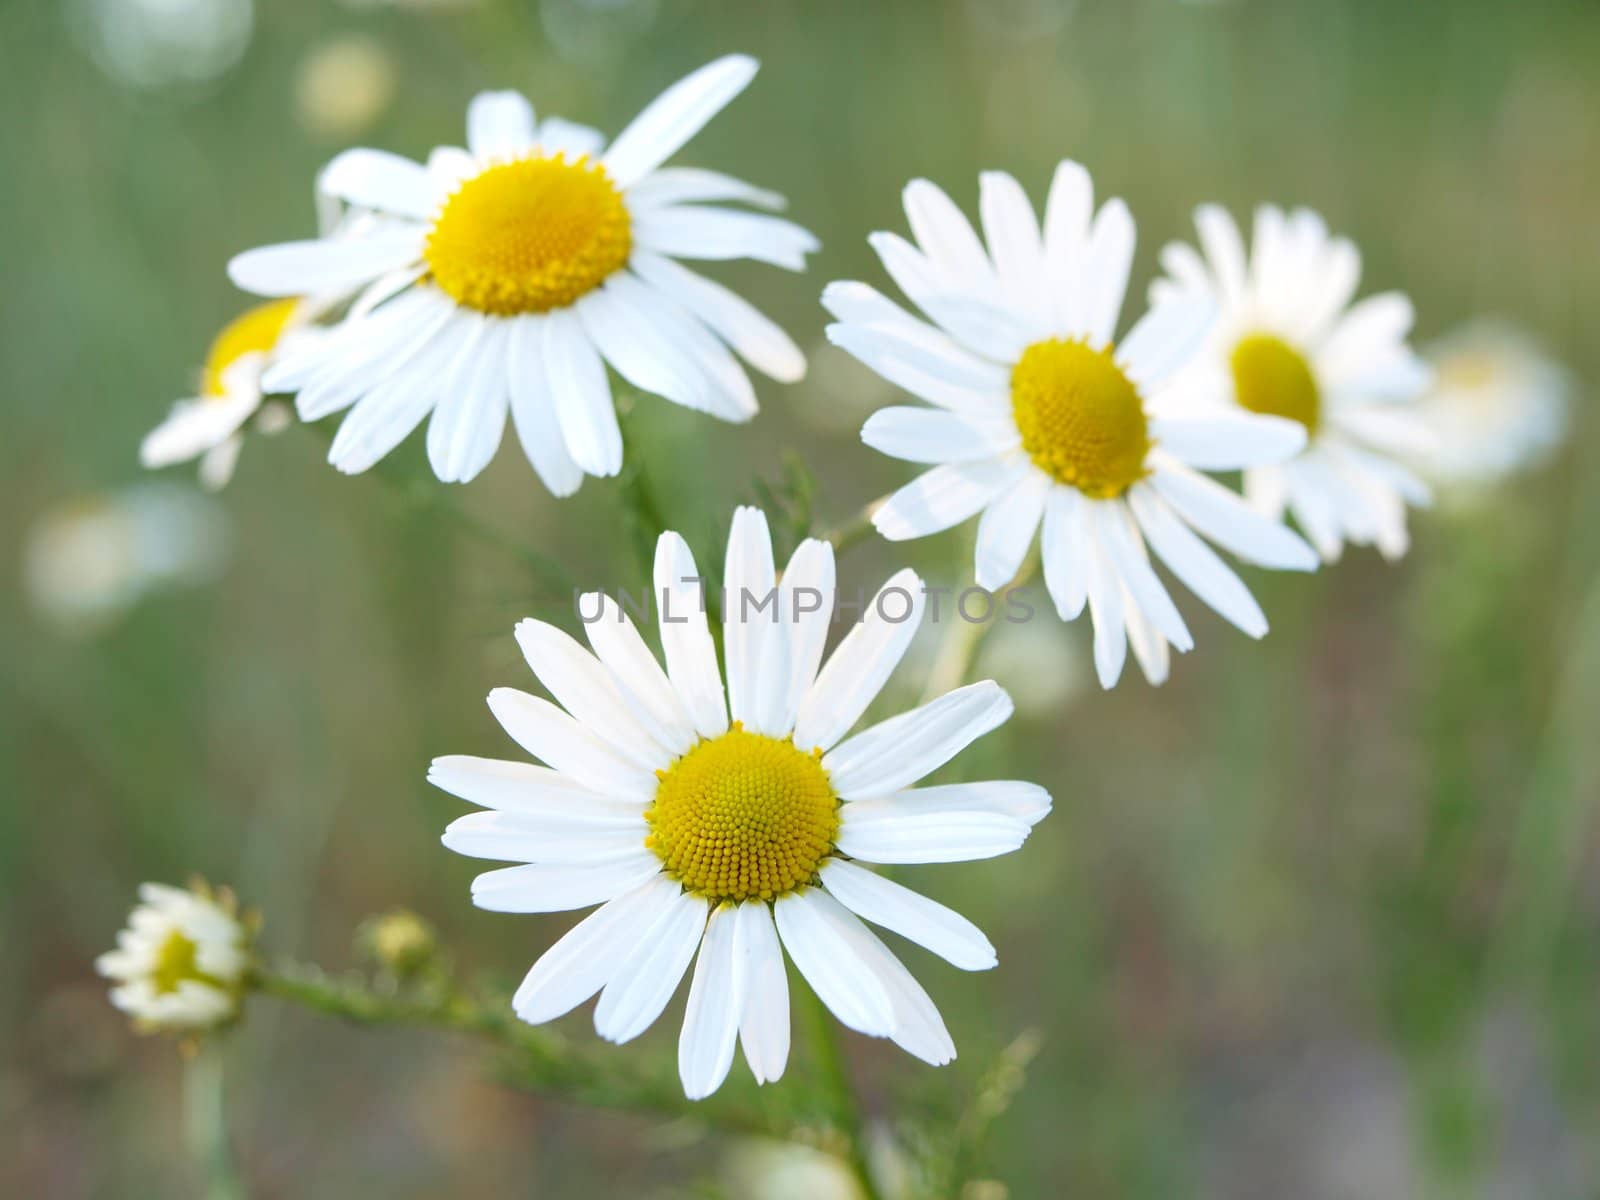 Marguerite flowers, grouped together, towards fresh green background